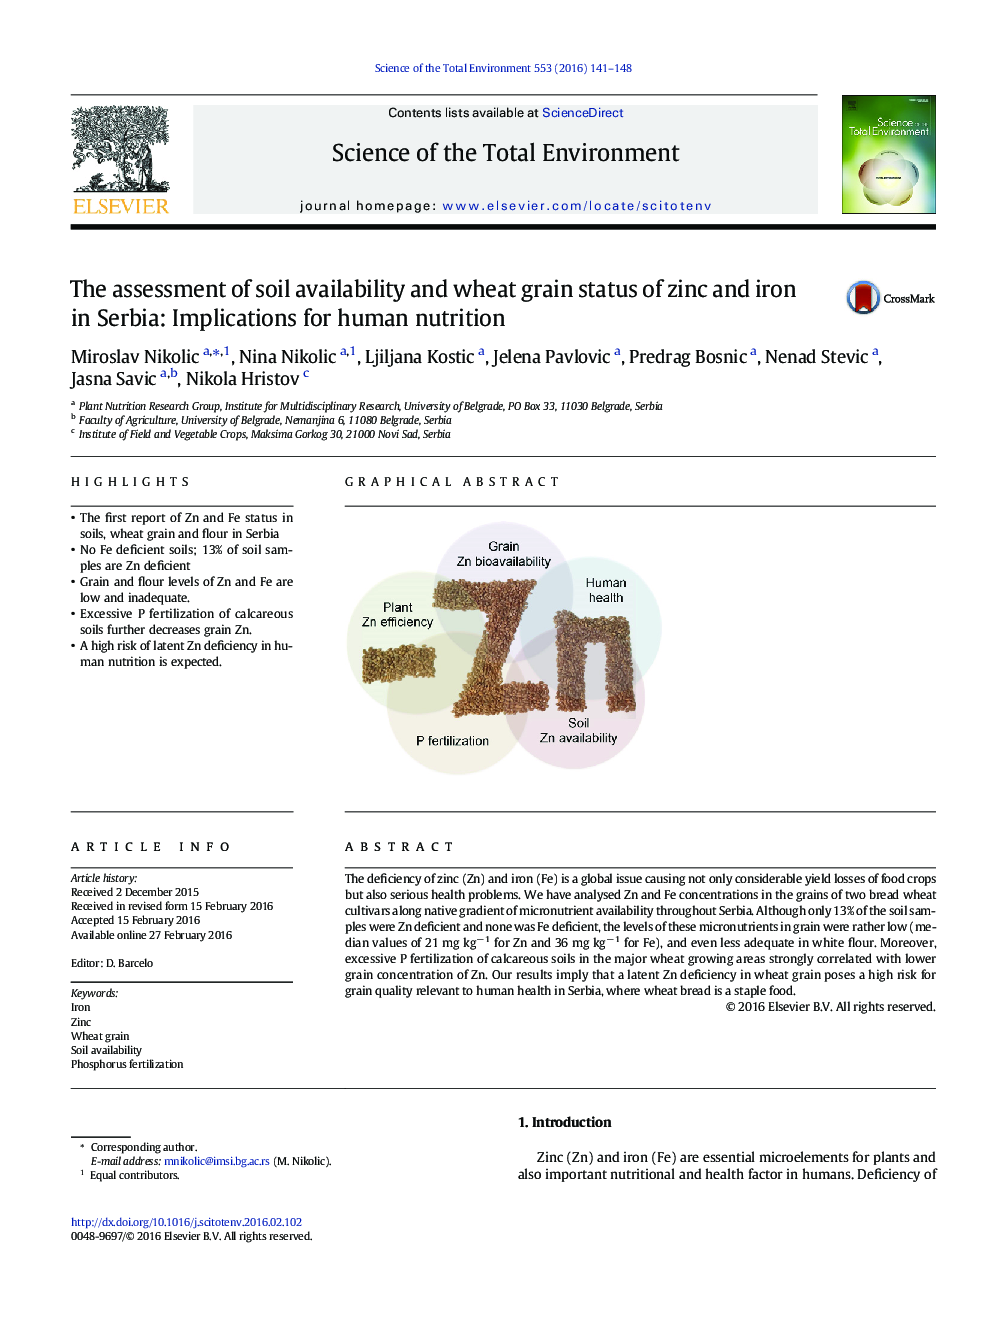 The assessment of soil availability and wheat grain status of zinc and iron in Serbia: Implications for human nutrition